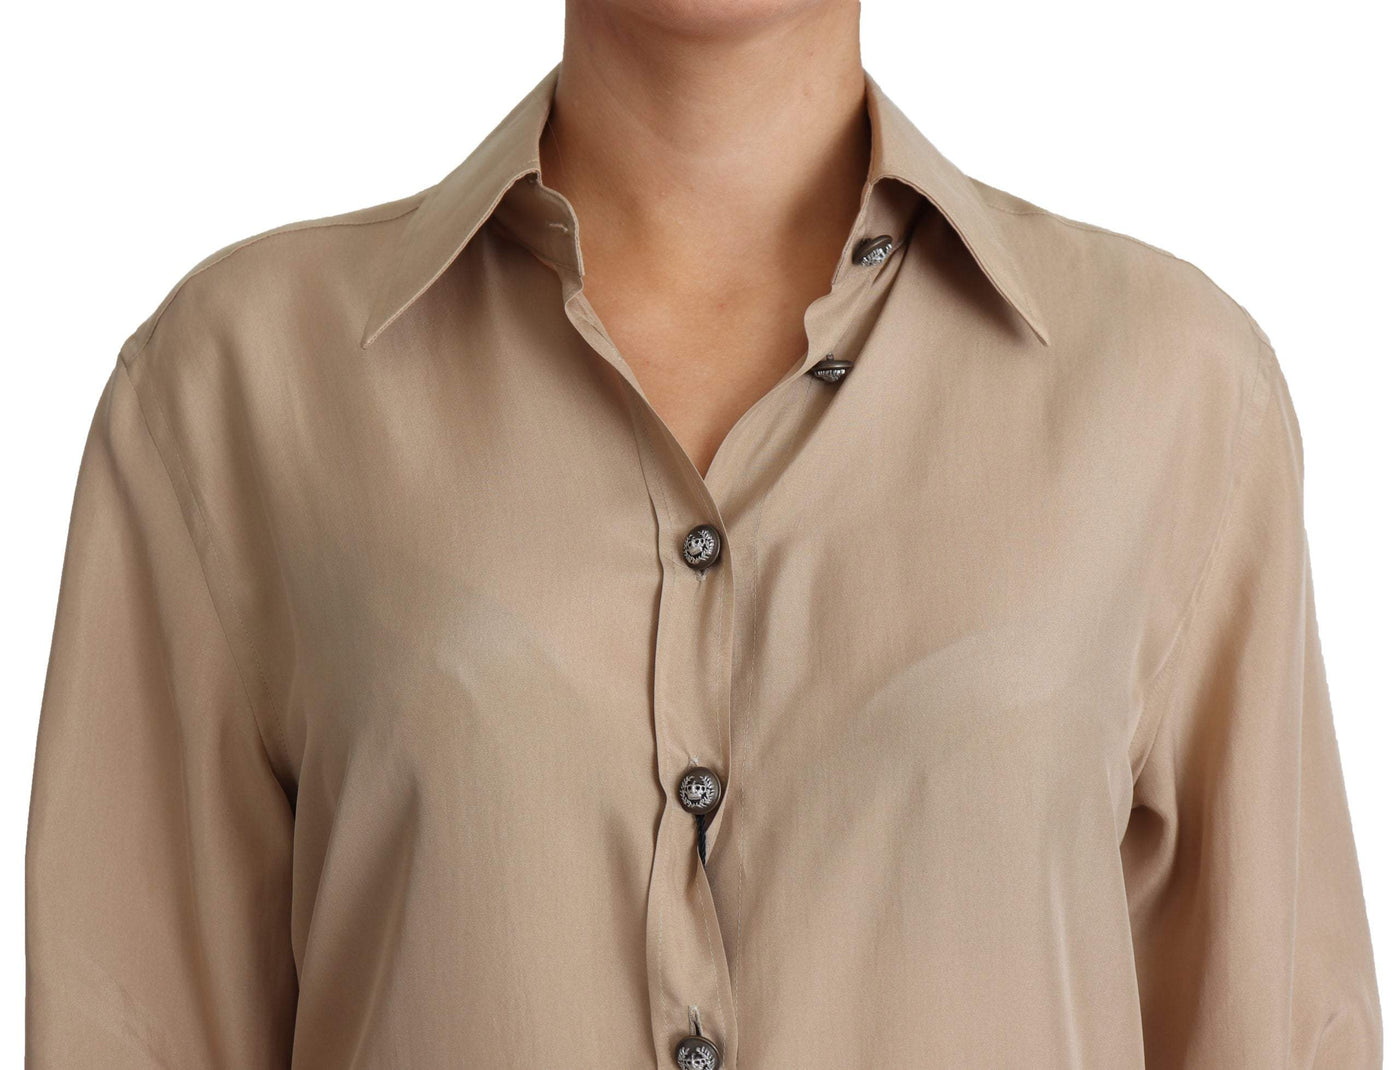 Dolce & Gabbana Beige Silk Shirt Decorative Buttons Top #women, Beige, Dolce & Gabbana, feed-agegroup-adult, feed-color-Beige, feed-gender-female, feed-size-IT38|XS, IT38|XS, Shirts - Women - Clothing, Women - New Arrivals at SEYMAYKA